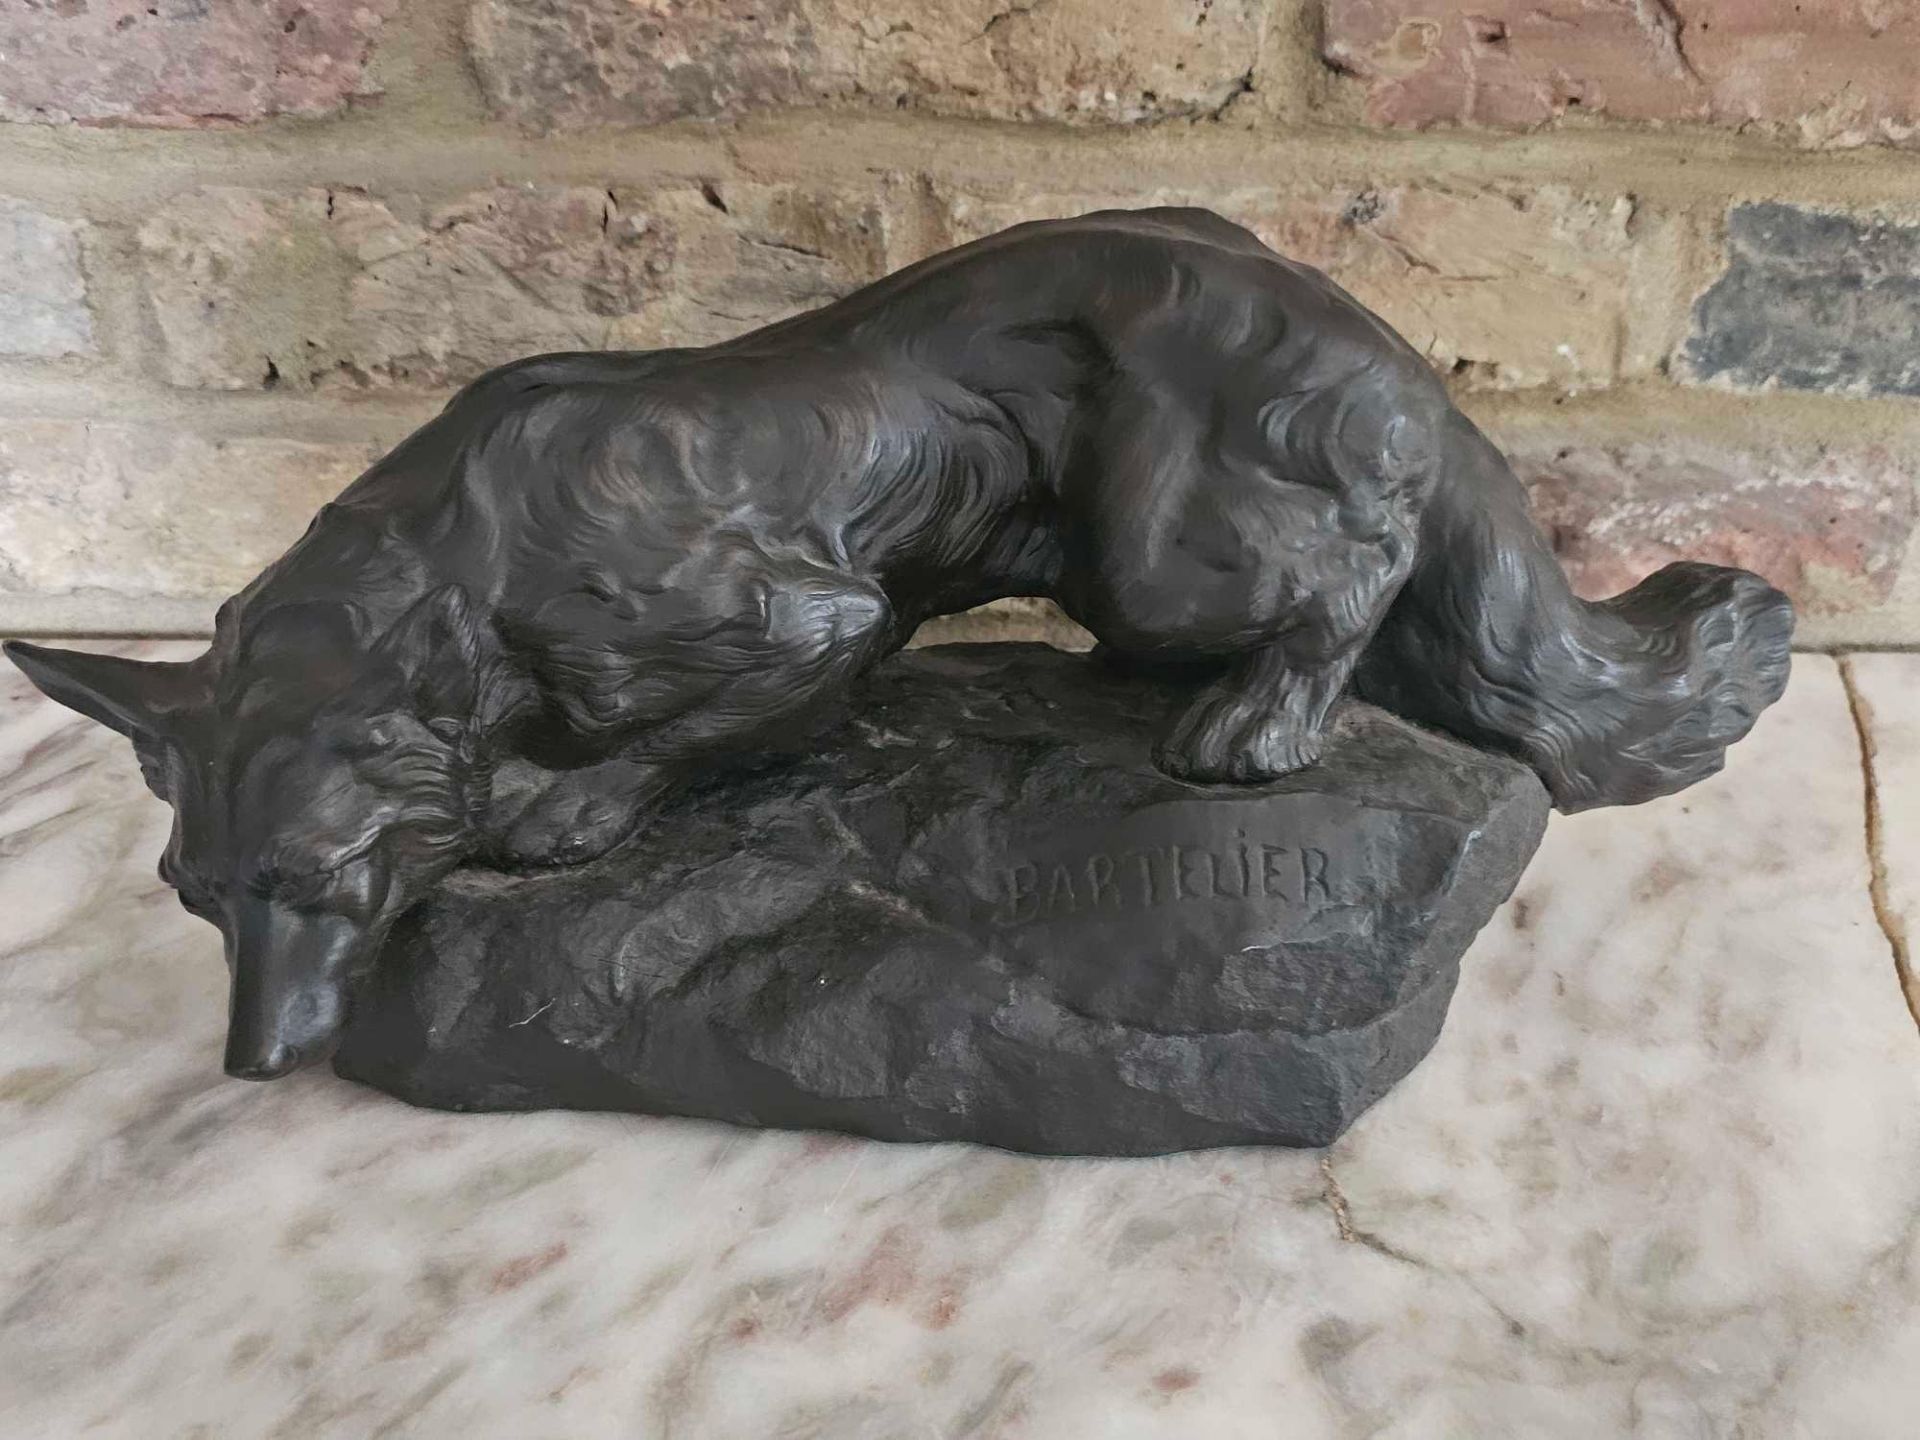 Sculpture Alert Fox After Bartelier Signed 43cm Long The Crouching Fox On A Naturalistic Rocky Base - Image 4 of 4